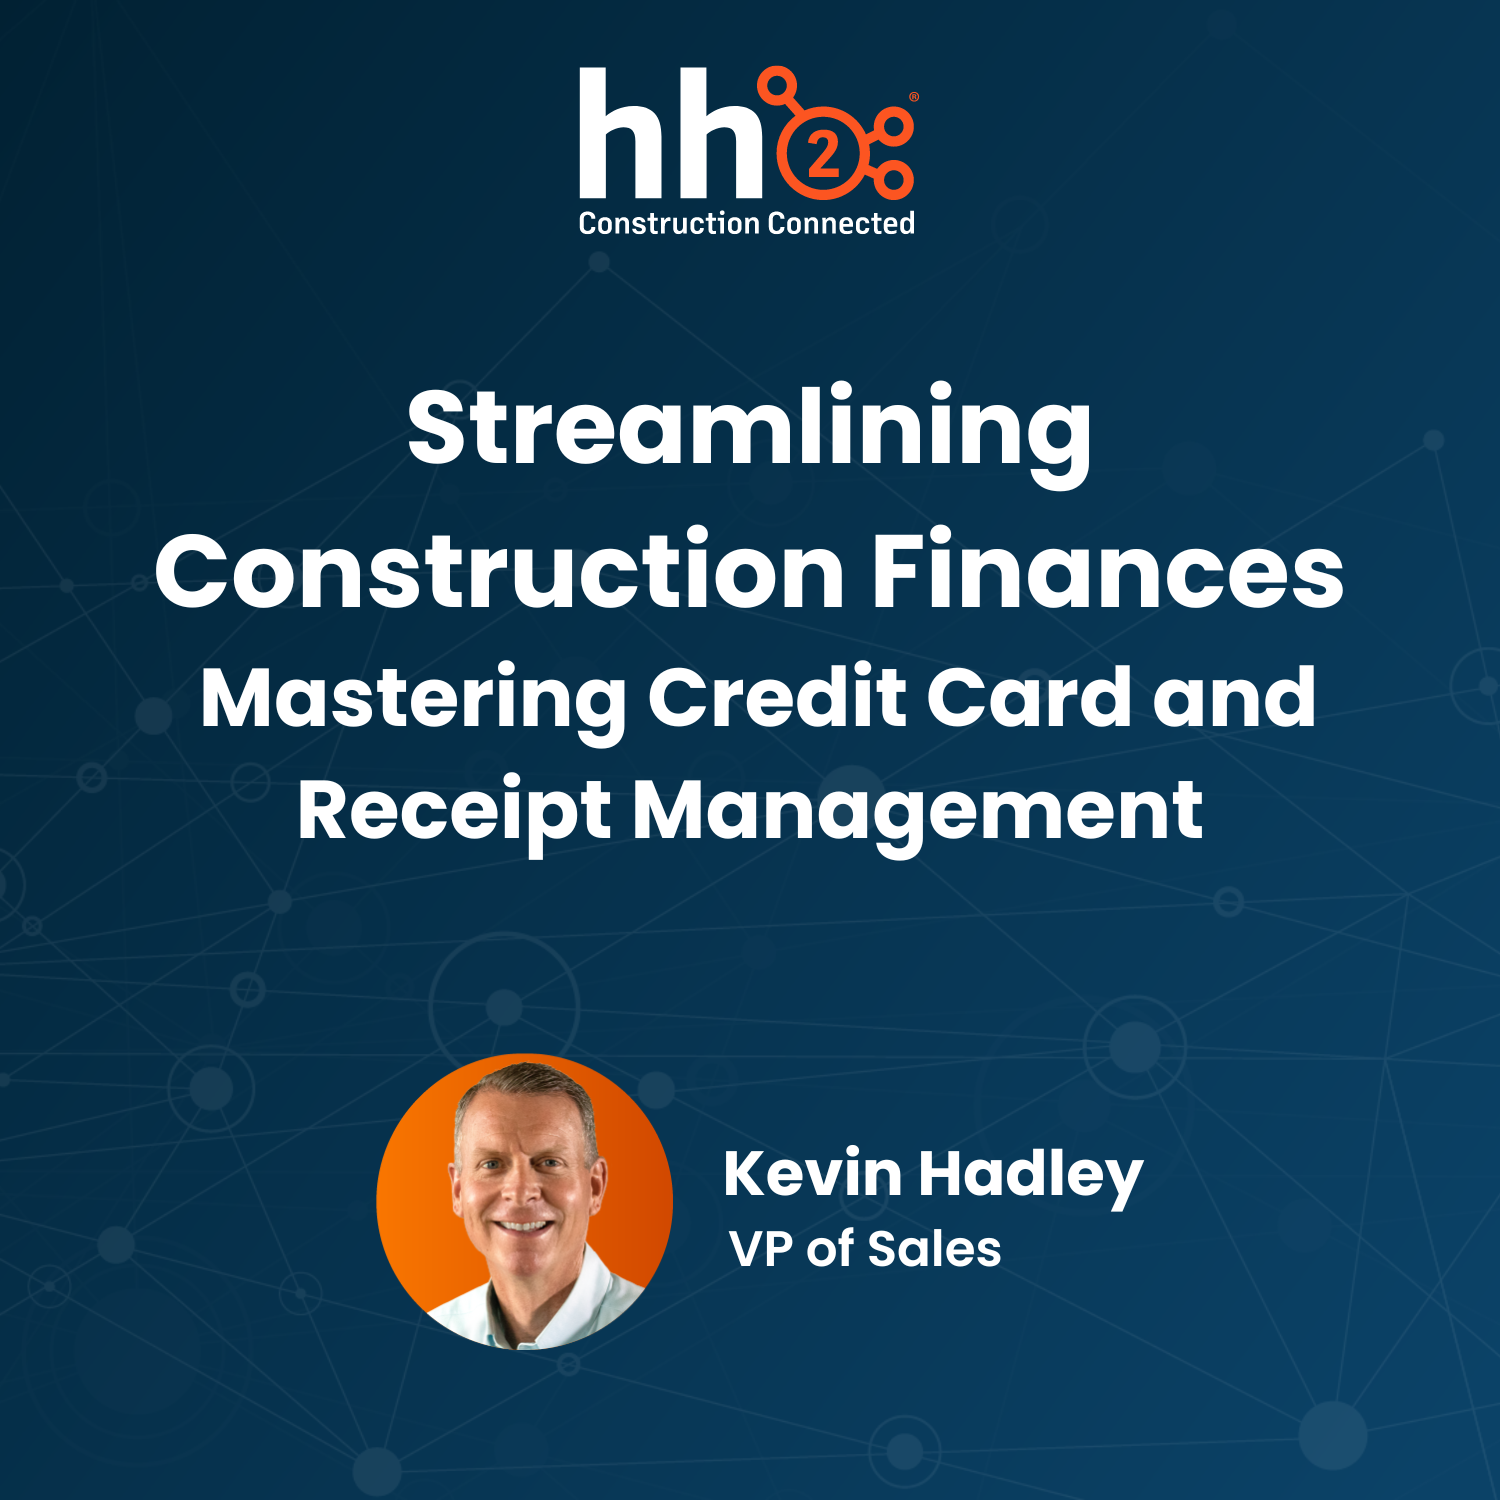 Streamlining Construction Finances: Mastering Credit Card and Receipt Management